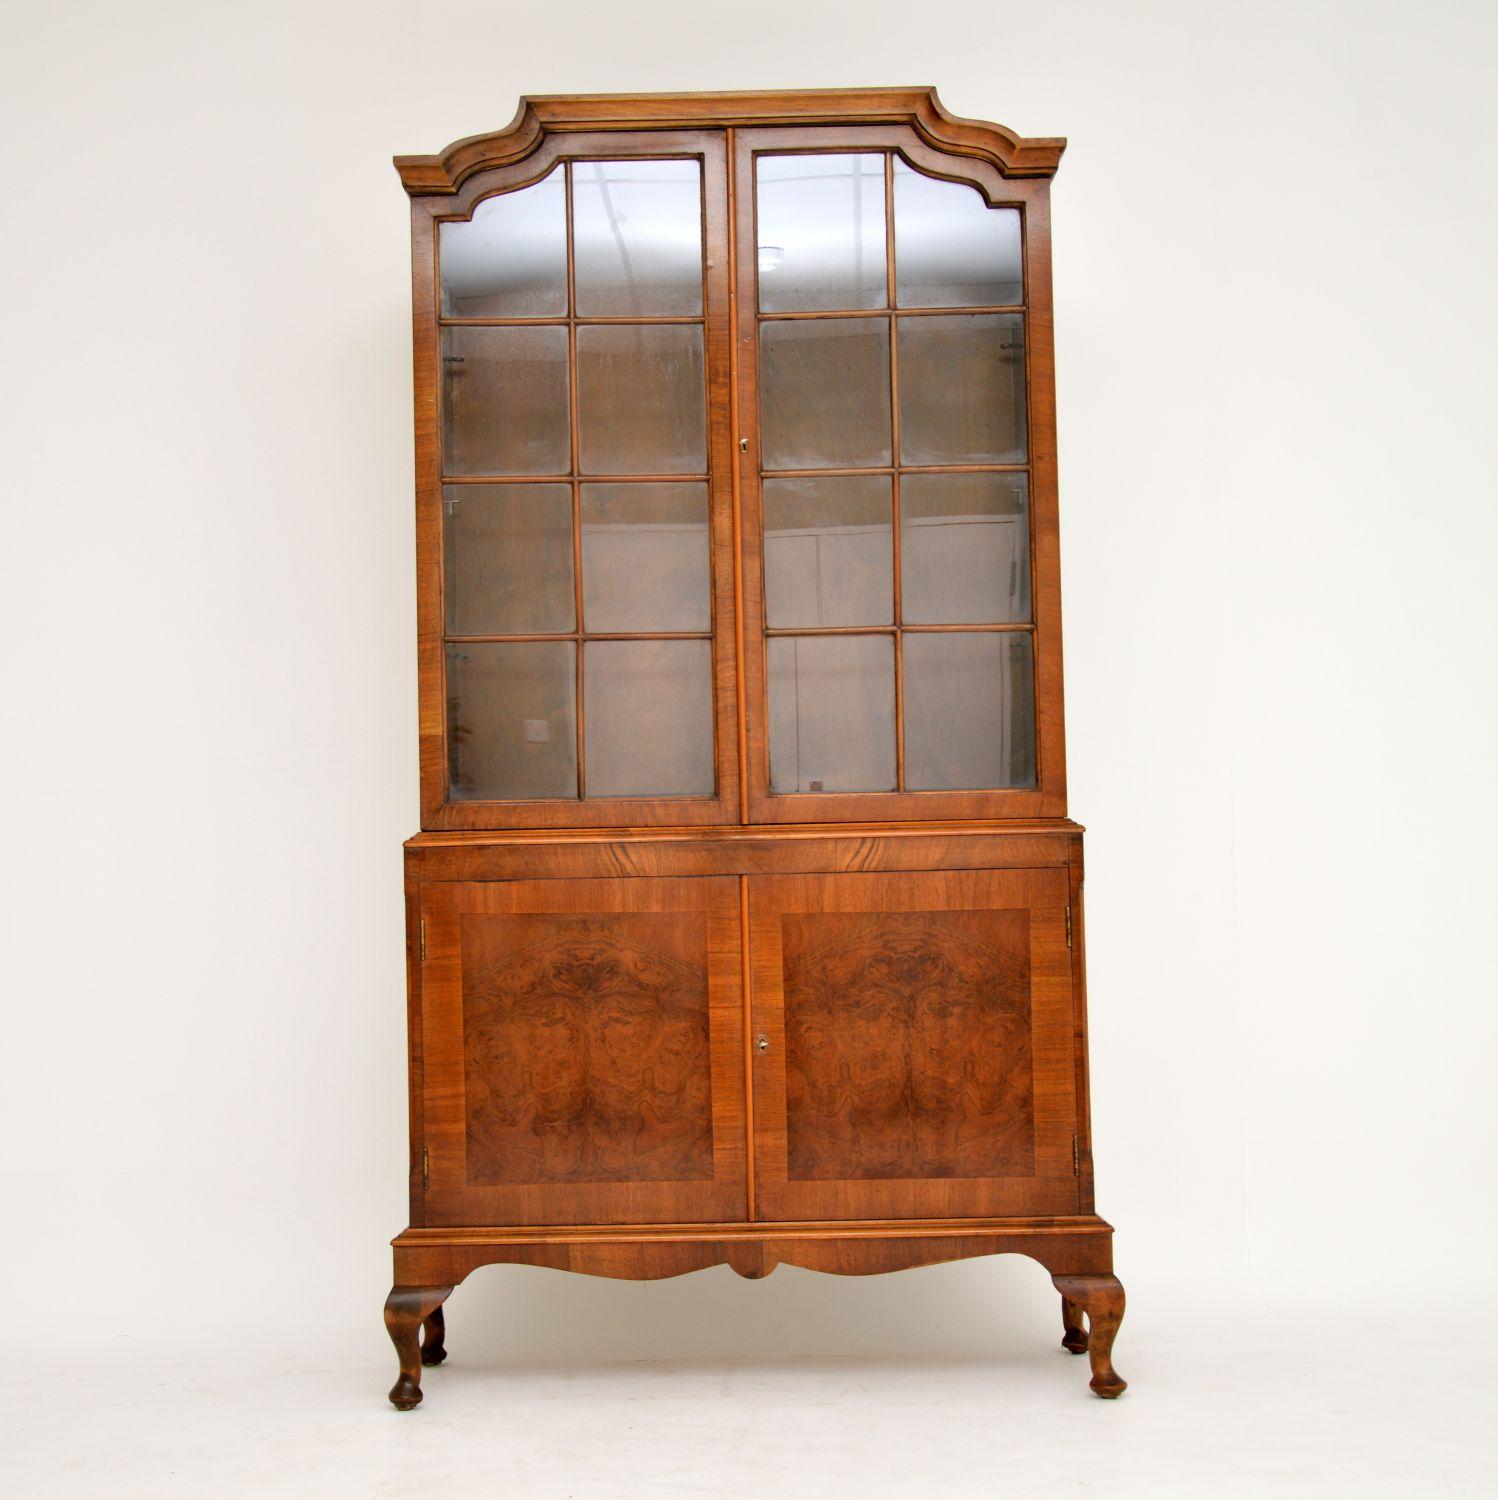 Antique two section astral-glazed walnut bookcase with a burr walnut panelled cupboard below and sitting on Queen Anne feet. It has a shaped top and the bottom section has chamfered edges. There are adjustable shelves in the top section and a loose